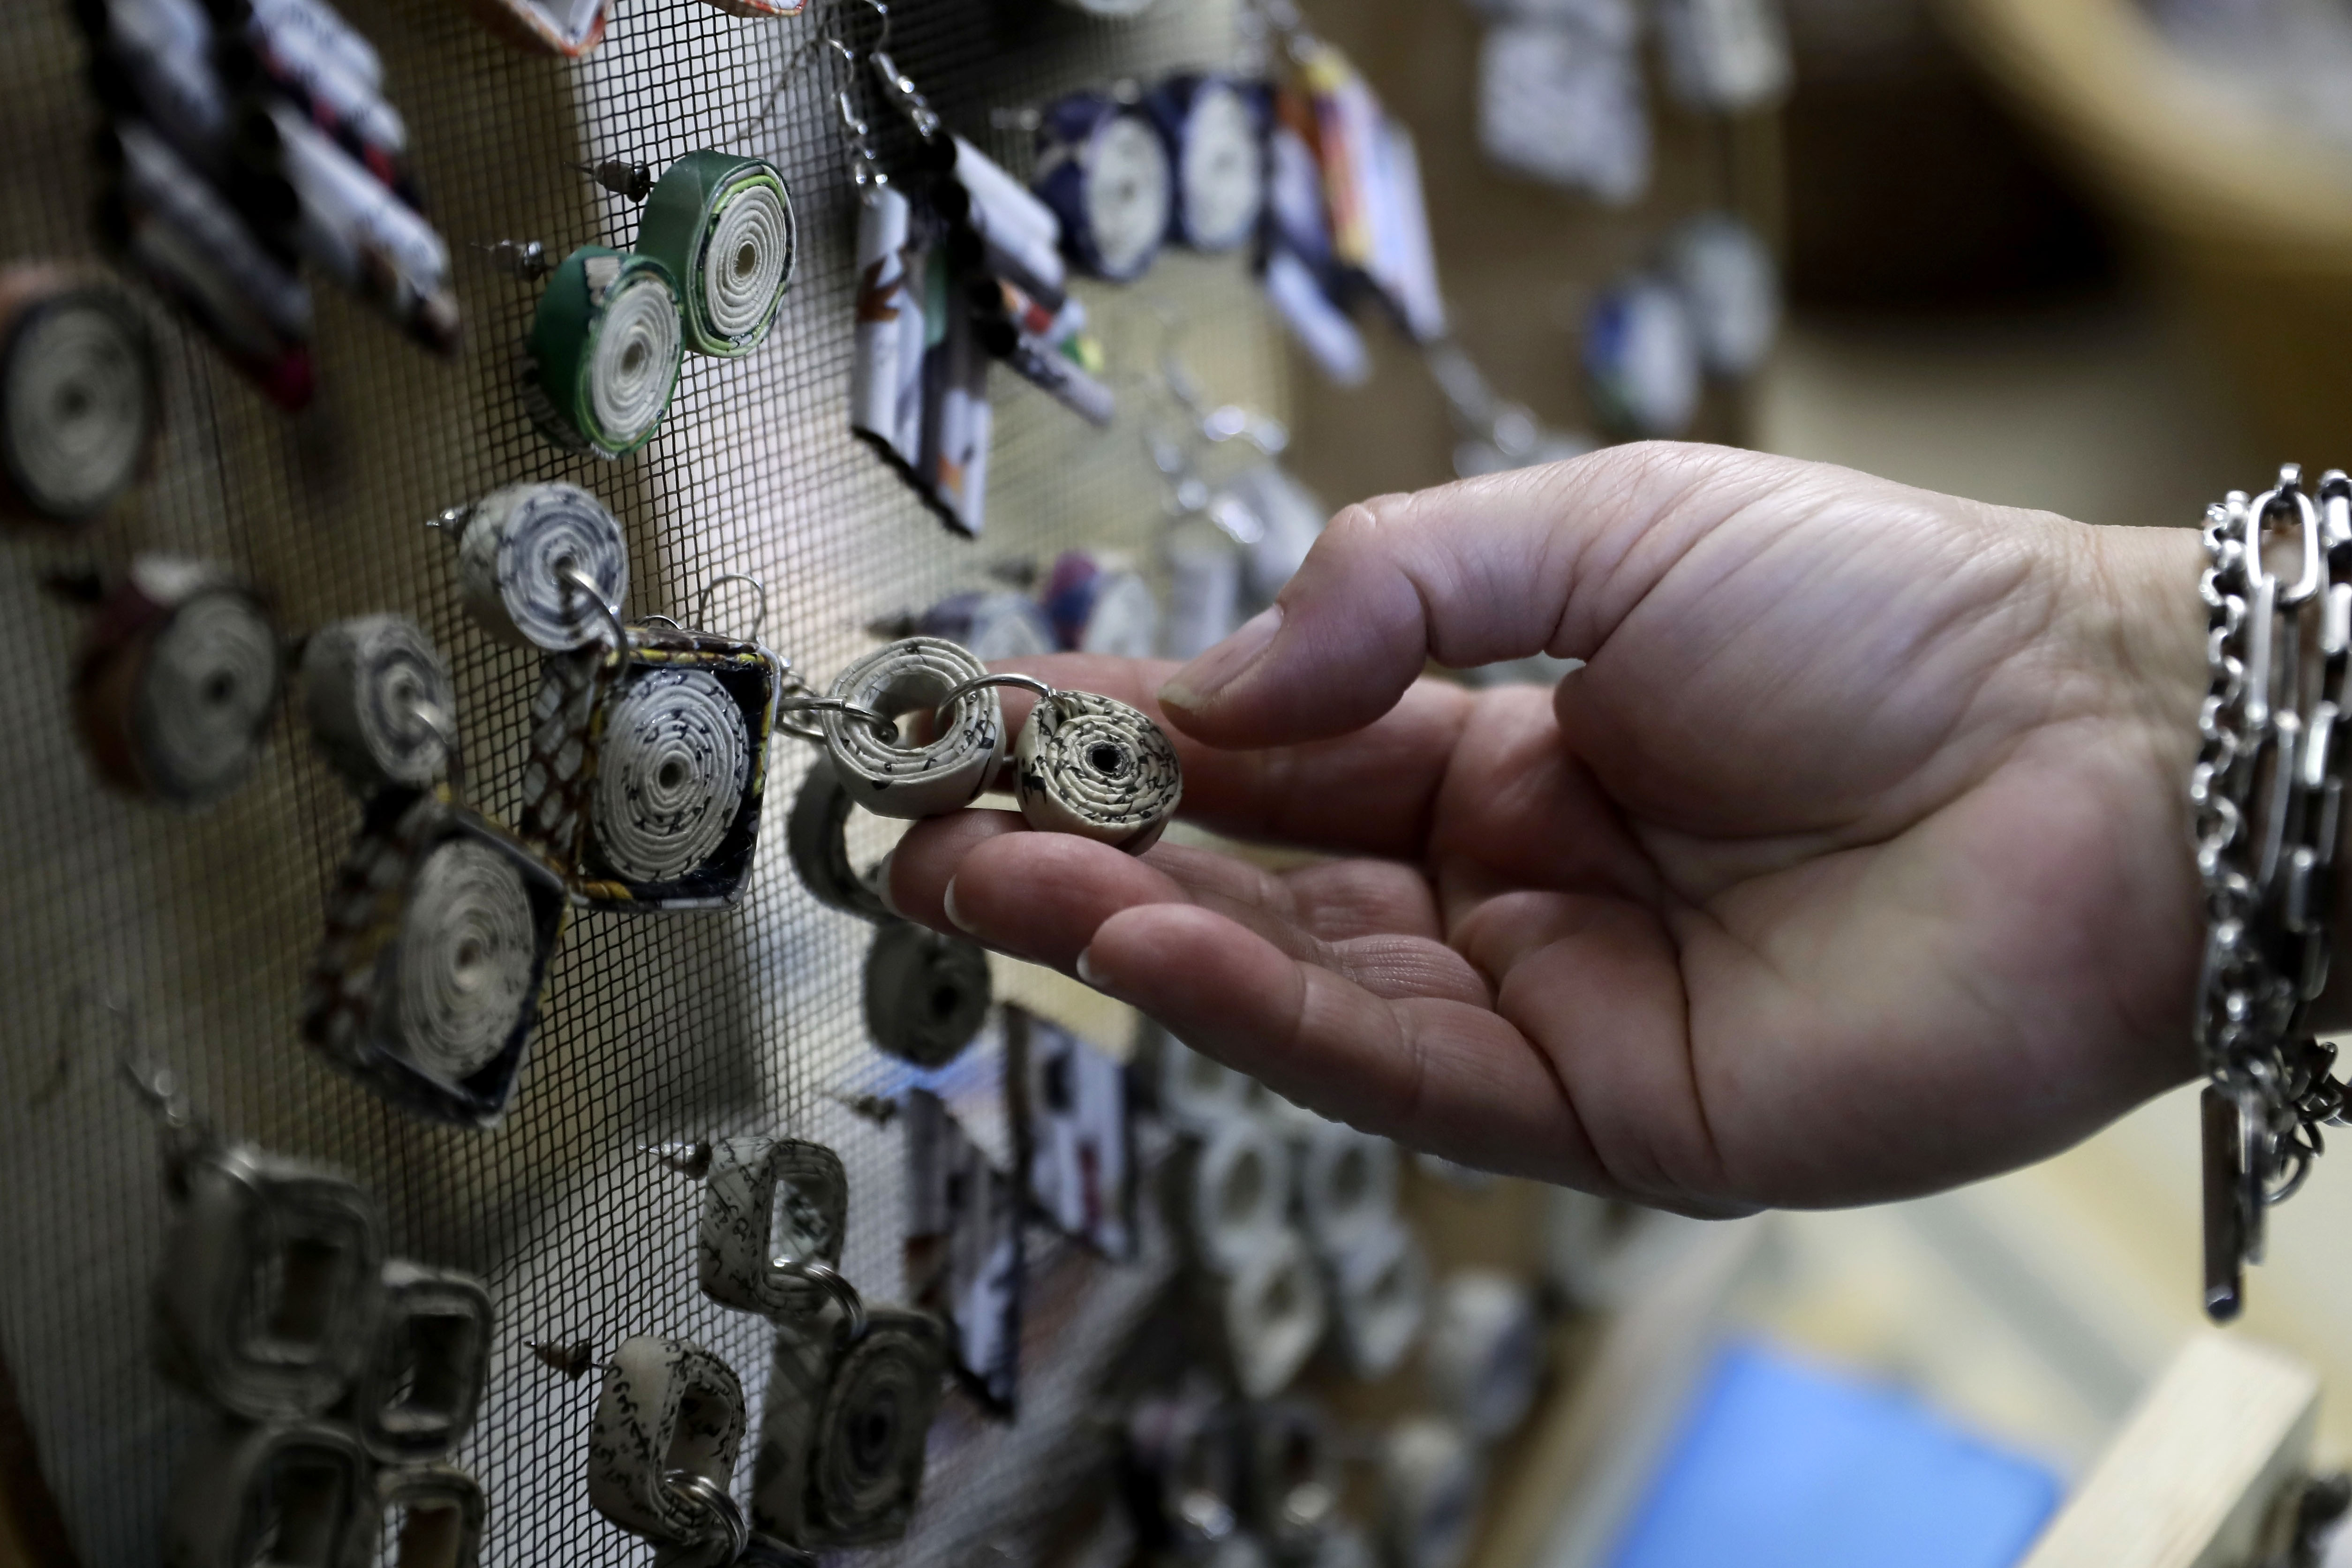 A woman inspects jewelry made out of recycled materials during the opening of the Eco Souk shop in Beirut on February 06, 2019. (File photo: AFP)